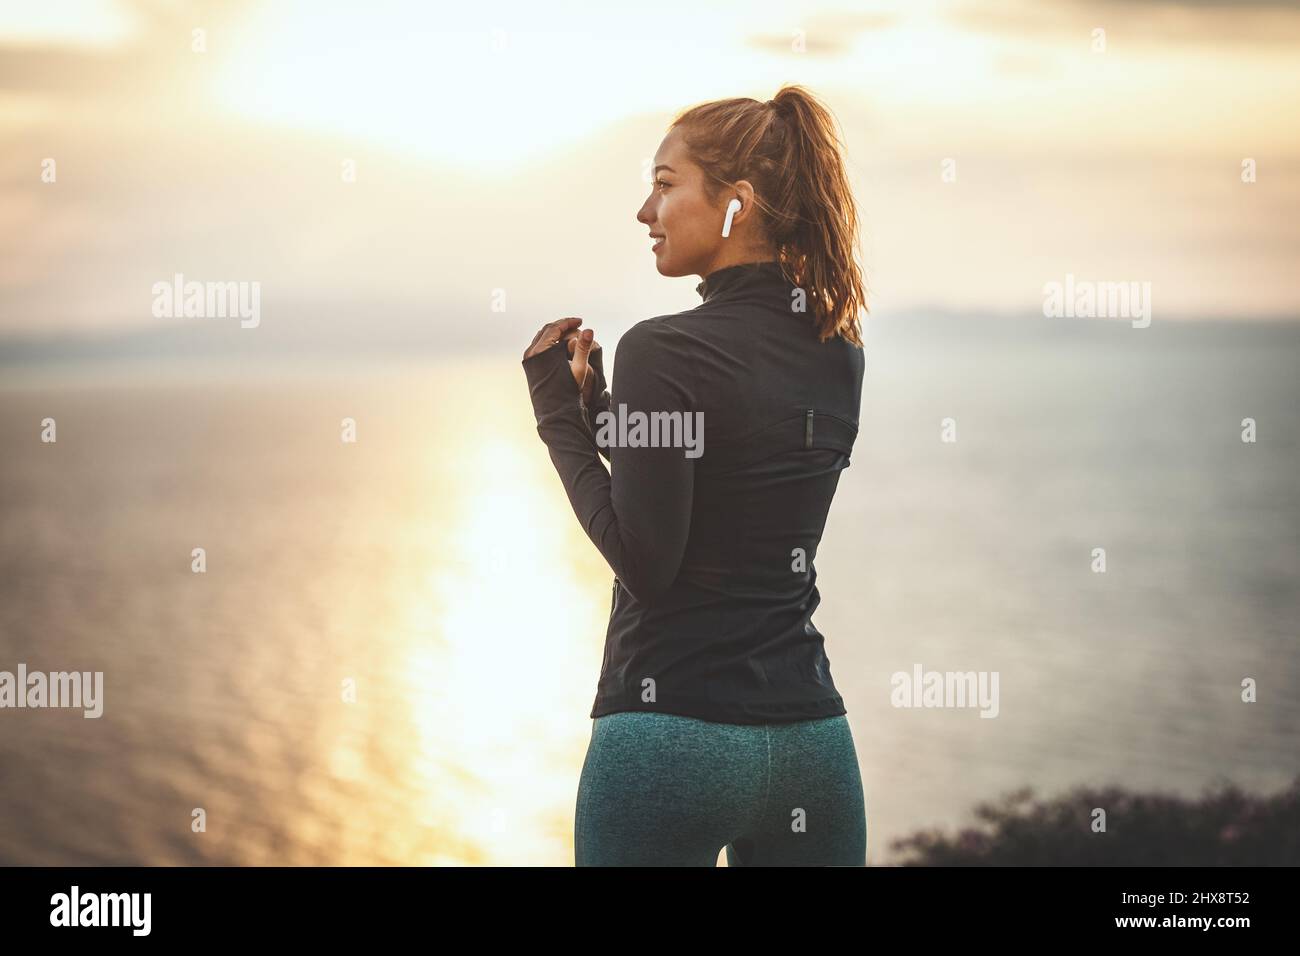 A beautiful young woman is ready to do stretching exercise by the sea in sunrise hearing music by headphones. Stock Photo